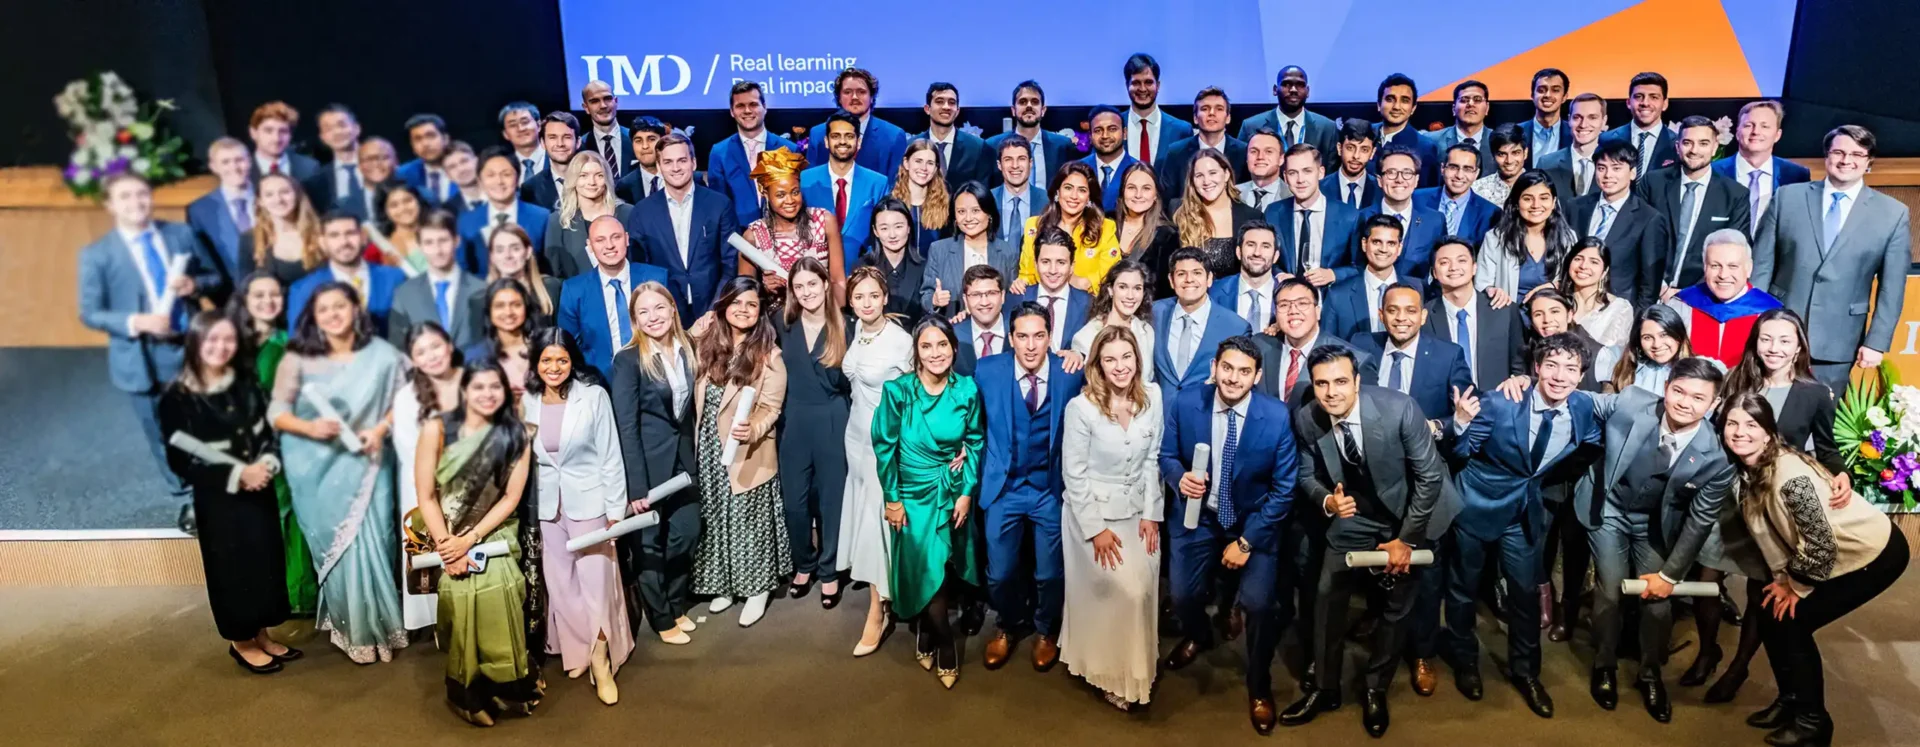 IMD 2023 MBA at their graduation on stage together cheering. - IMD Business School